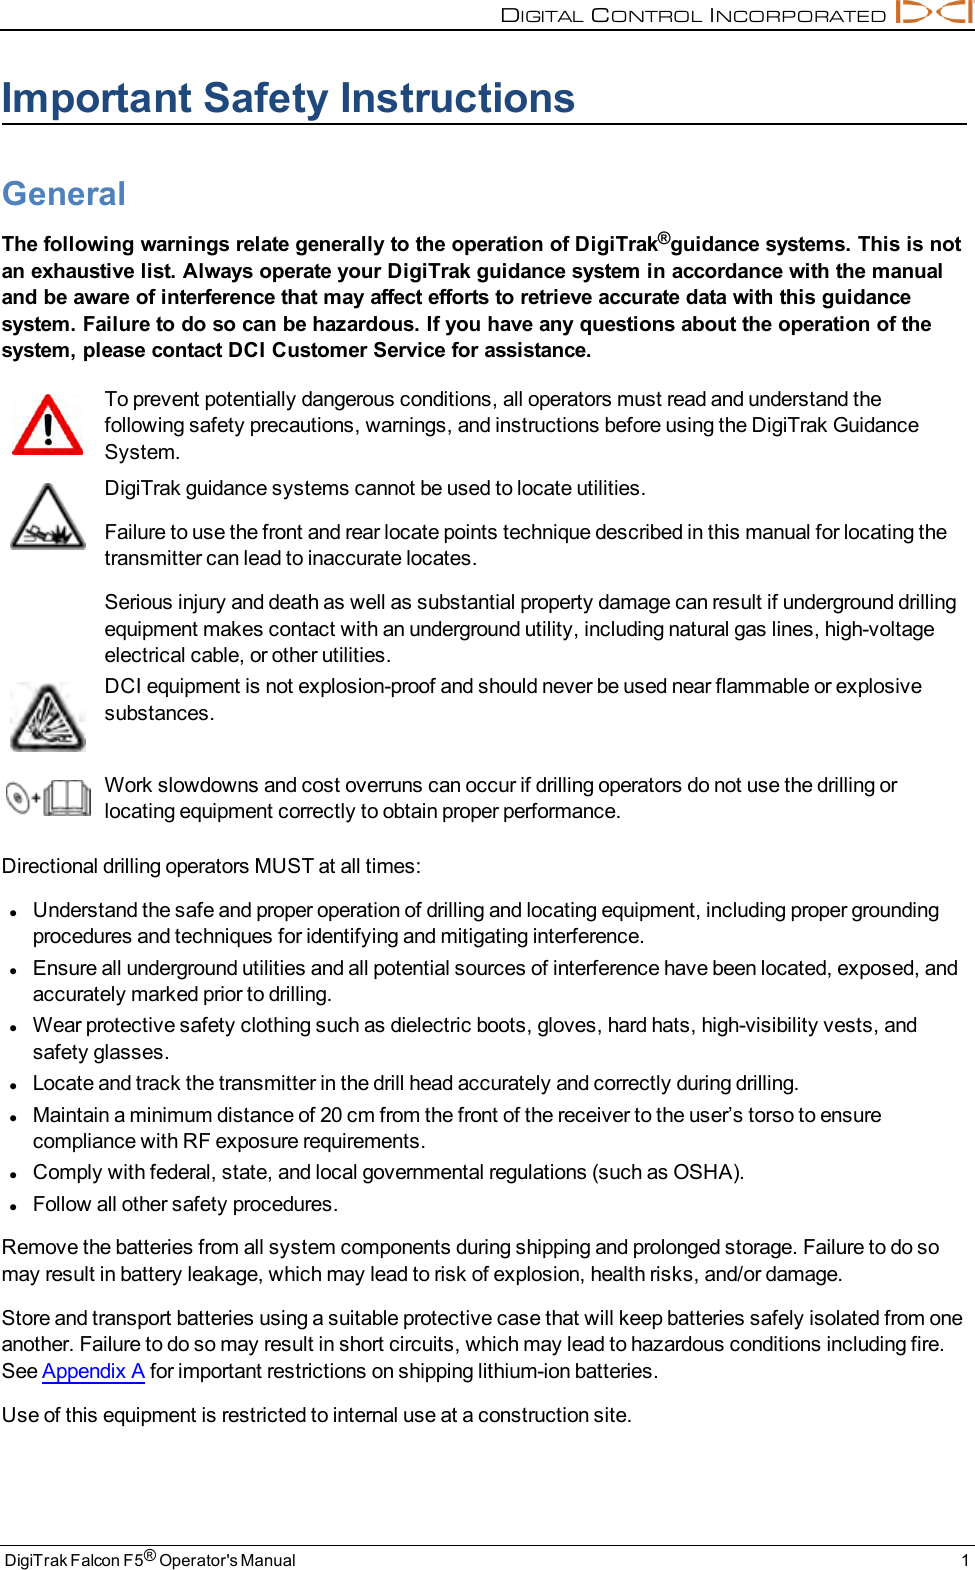 DIGITALCONTROLINCORPORATEDDigiTrak Falcon F5®Operator&apos;s Manual 1Important Safety InstructionsGeneralThe following warnings relate generally to the operation of DigiTrak®guidance systems. This is notan exhaustive list. Always operate your DigiTrak guidance system in accordance with the manualand be aware of interference that may affect efforts to retrieve accurate data with this guidancesystem. Failure to do so can be hazardous. If you have any questions about the operation of thesystem, please contact DCI Customer Service for assistance.To prevent potentially dangerous conditions, all operators must read and understand thefollowing safety precautions, warnings, and instructions before using the DigiTrak GuidanceSystem.DigiTrak guidance systems cannot be used to locate utilities.Failure to use the front and rear locate points technique described in this manual for locating thetransmitter can lead to inaccurate locates.Serious injury and death as well as substantial property damage can result if underground drillingequipment makes contact with an underground utility, including natural gas lines, high-voltageelectrical cable, or other utilities.DCI equipment is not explosion-proof and should never be used near flammable or explosivesubstances.Work slowdowns and cost overruns can occur if drilling operators do not use the drilling orlocating equipment correctly to obtain proper performance.Directional drilling operators MUST at all times:lUnderstand the safe and proper operation of drilling and locating equipment, including proper groundingprocedures and techniques for identifying and mitigating interference.lEnsure all underground utilities and all potential sources of interference have been located, exposed, andaccurately marked prior to drilling.lWear protective safety clothing such as dielectric boots, gloves, hard hats, high-visibility vests, andsafety glasses.lLocate and track the transmitter in the drill head accurately and correctly during drilling.lMaintain a minimum distance of 20 cm from the front of the receiver to the user’s torso to ensurecompliance with RF exposure requirements.lComply with federal, state, and local governmental regulations (such as OSHA).lFollow all other safety procedures.Remove the batteries from all system components during shipping and prolonged storage. Failure to do somay result in battery leakage, which may lead to risk of explosion, health risks, and/or damage.Store and transport batteries using a suitable protective case that will keep batteries safely isolated from oneanother. Failure to do so may result in short circuits, which may lead to hazardous conditions including fire.See Appendix A for important restrictions on shipping lithium-ion batteries.Use of this equipment is restricted to internal use at a construction site.